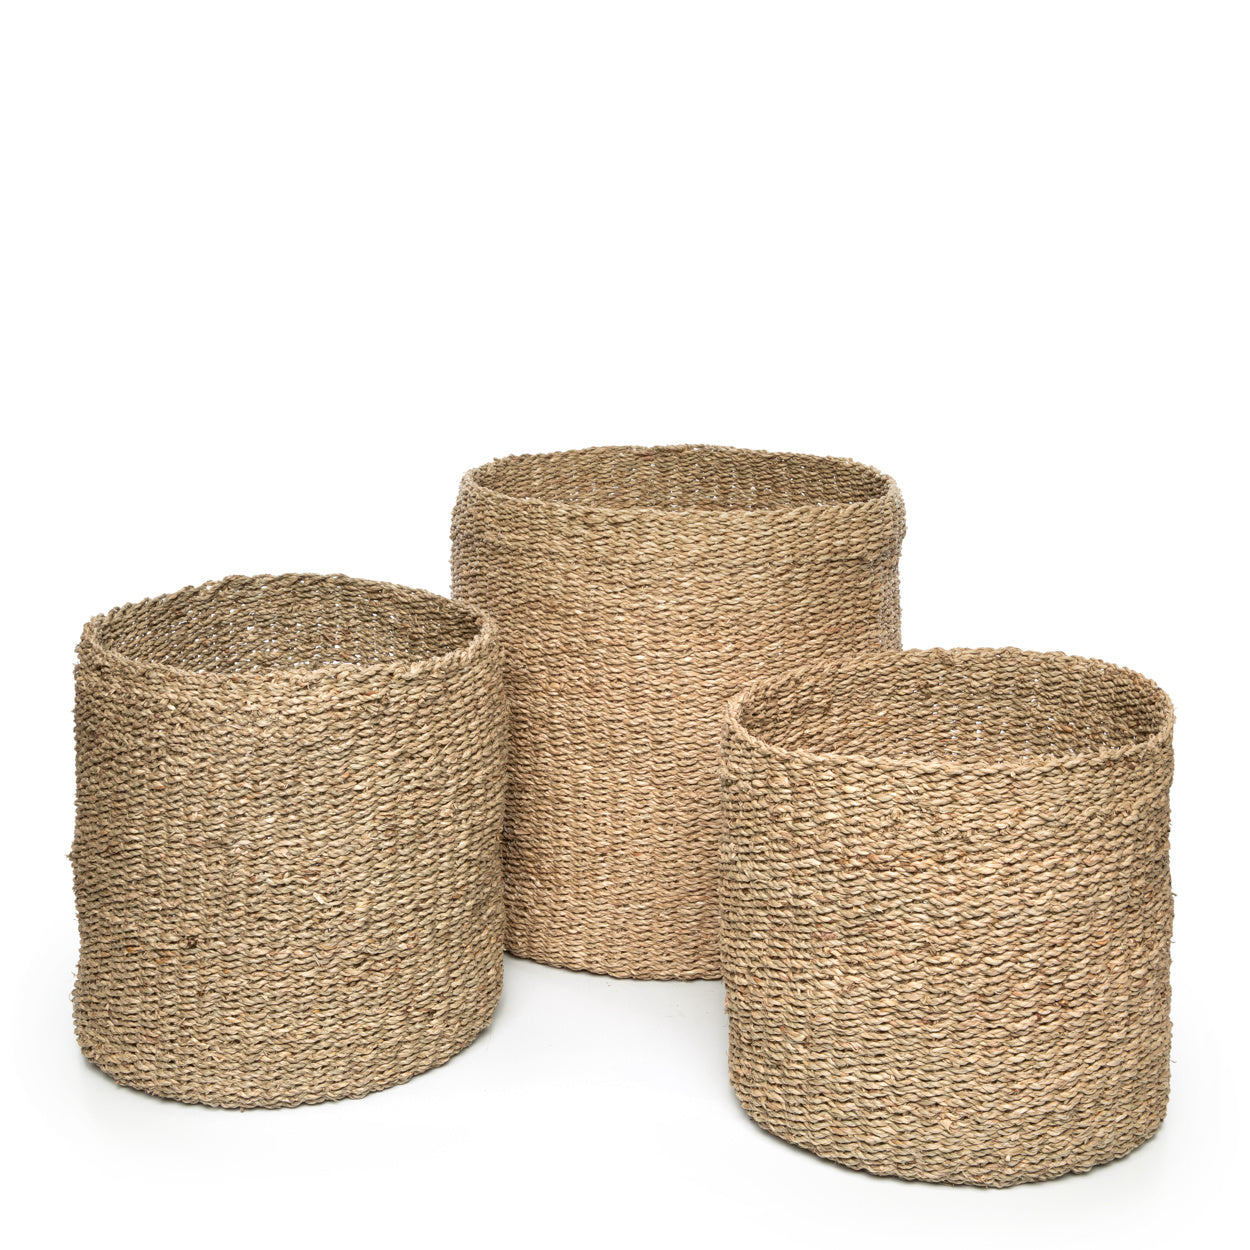 THE HO CHI MINH Baskets Set of 3 front view